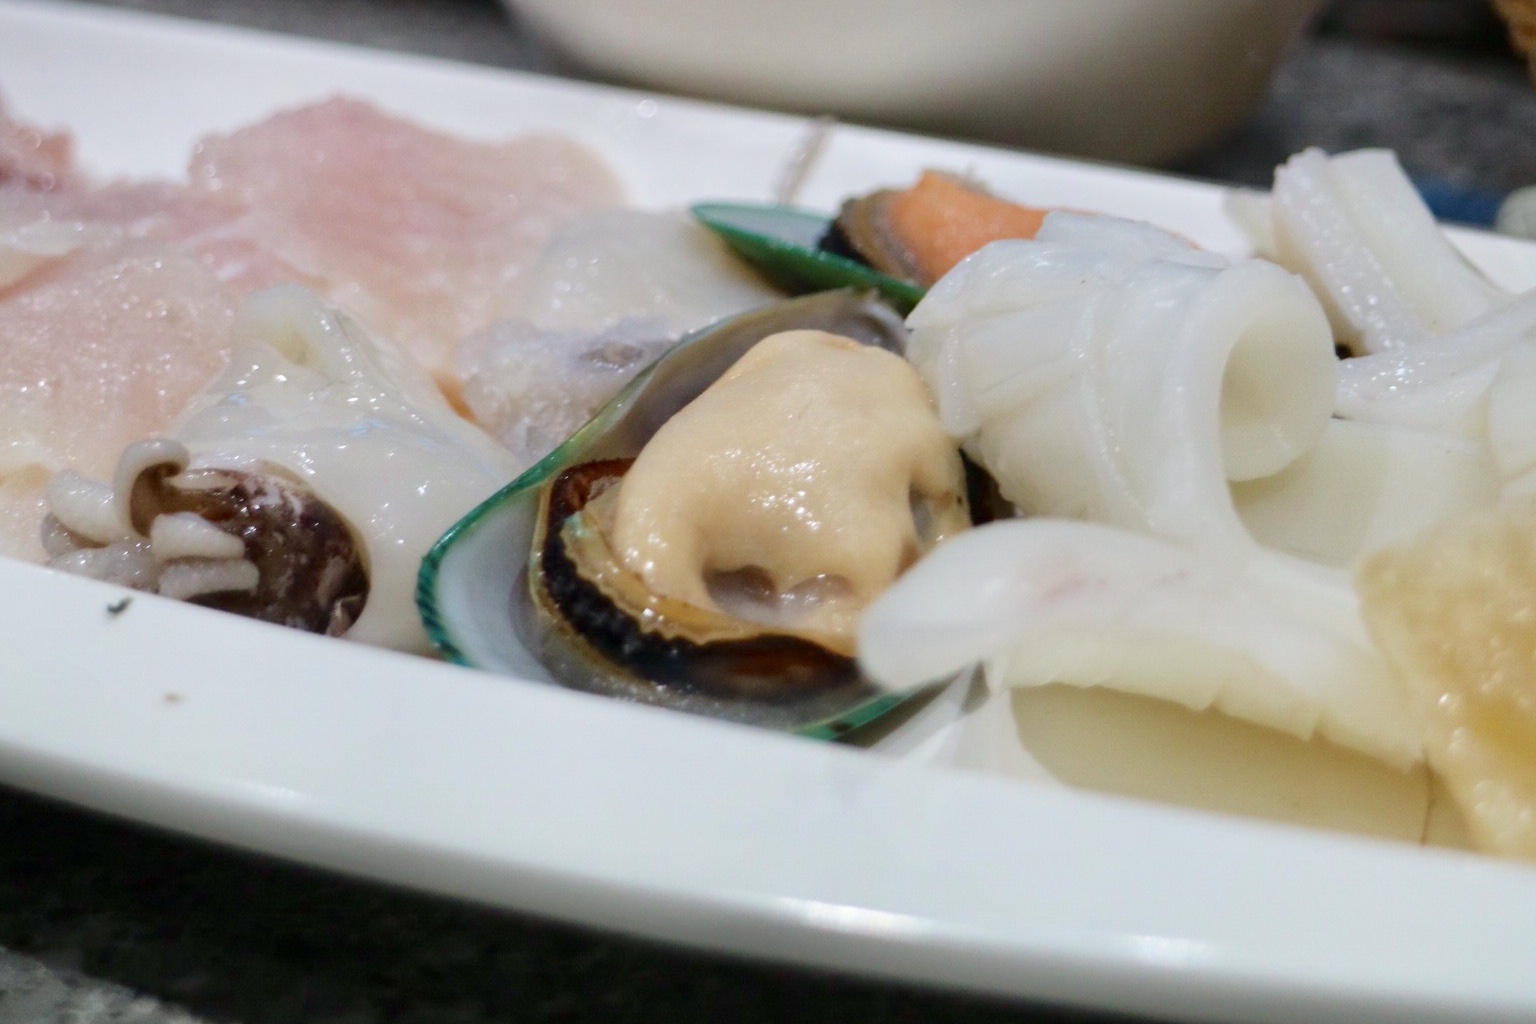 seafood - fish fillet, baby squid, mussel, and squid